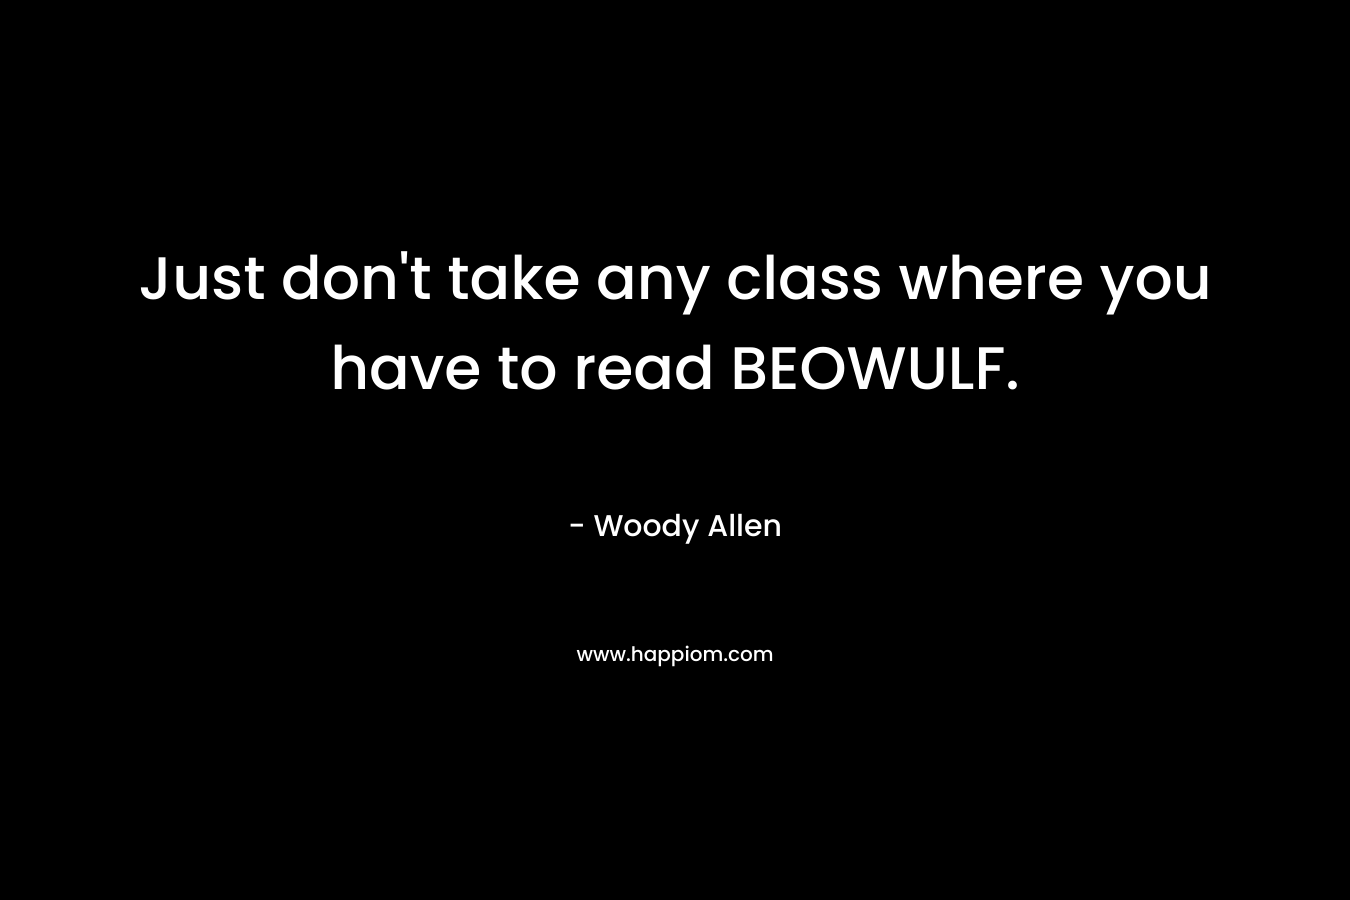 Just don’t take any class where you have to read BEOWULF. – Woody Allen